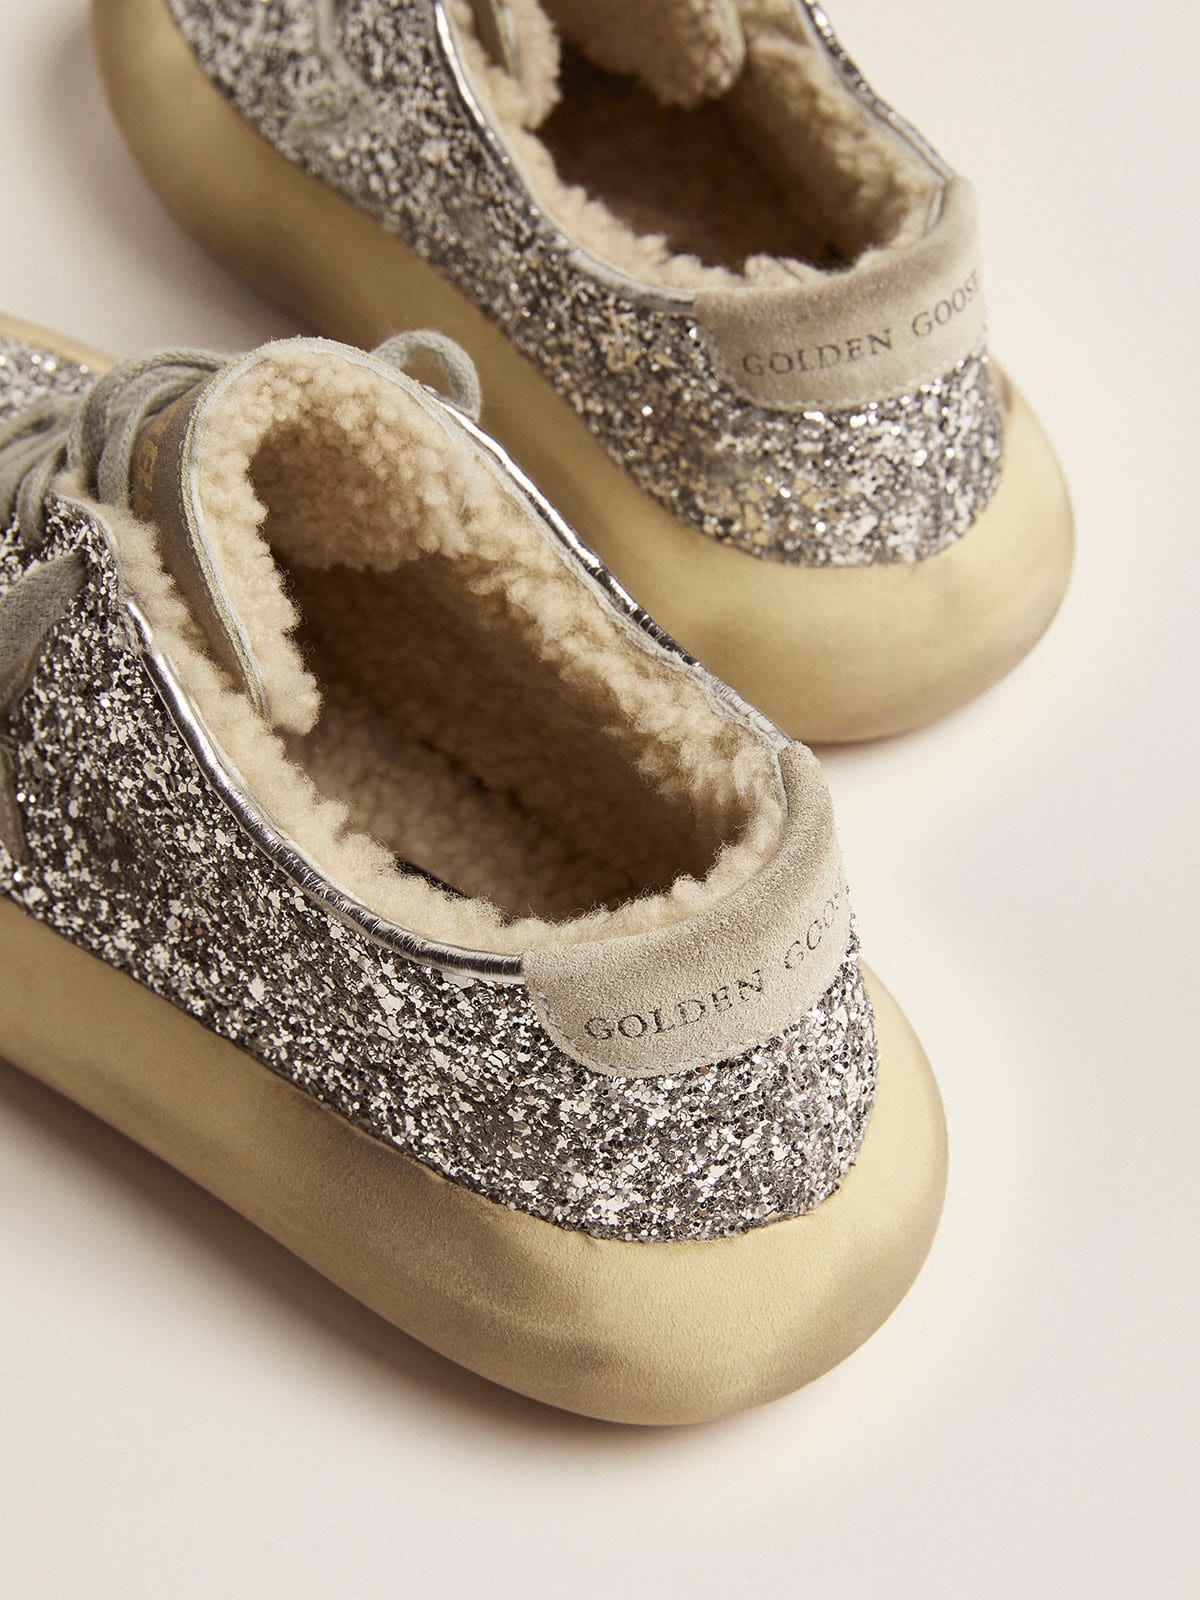 Women's Space-Star shoes in silver glitter with shearling lining - 5